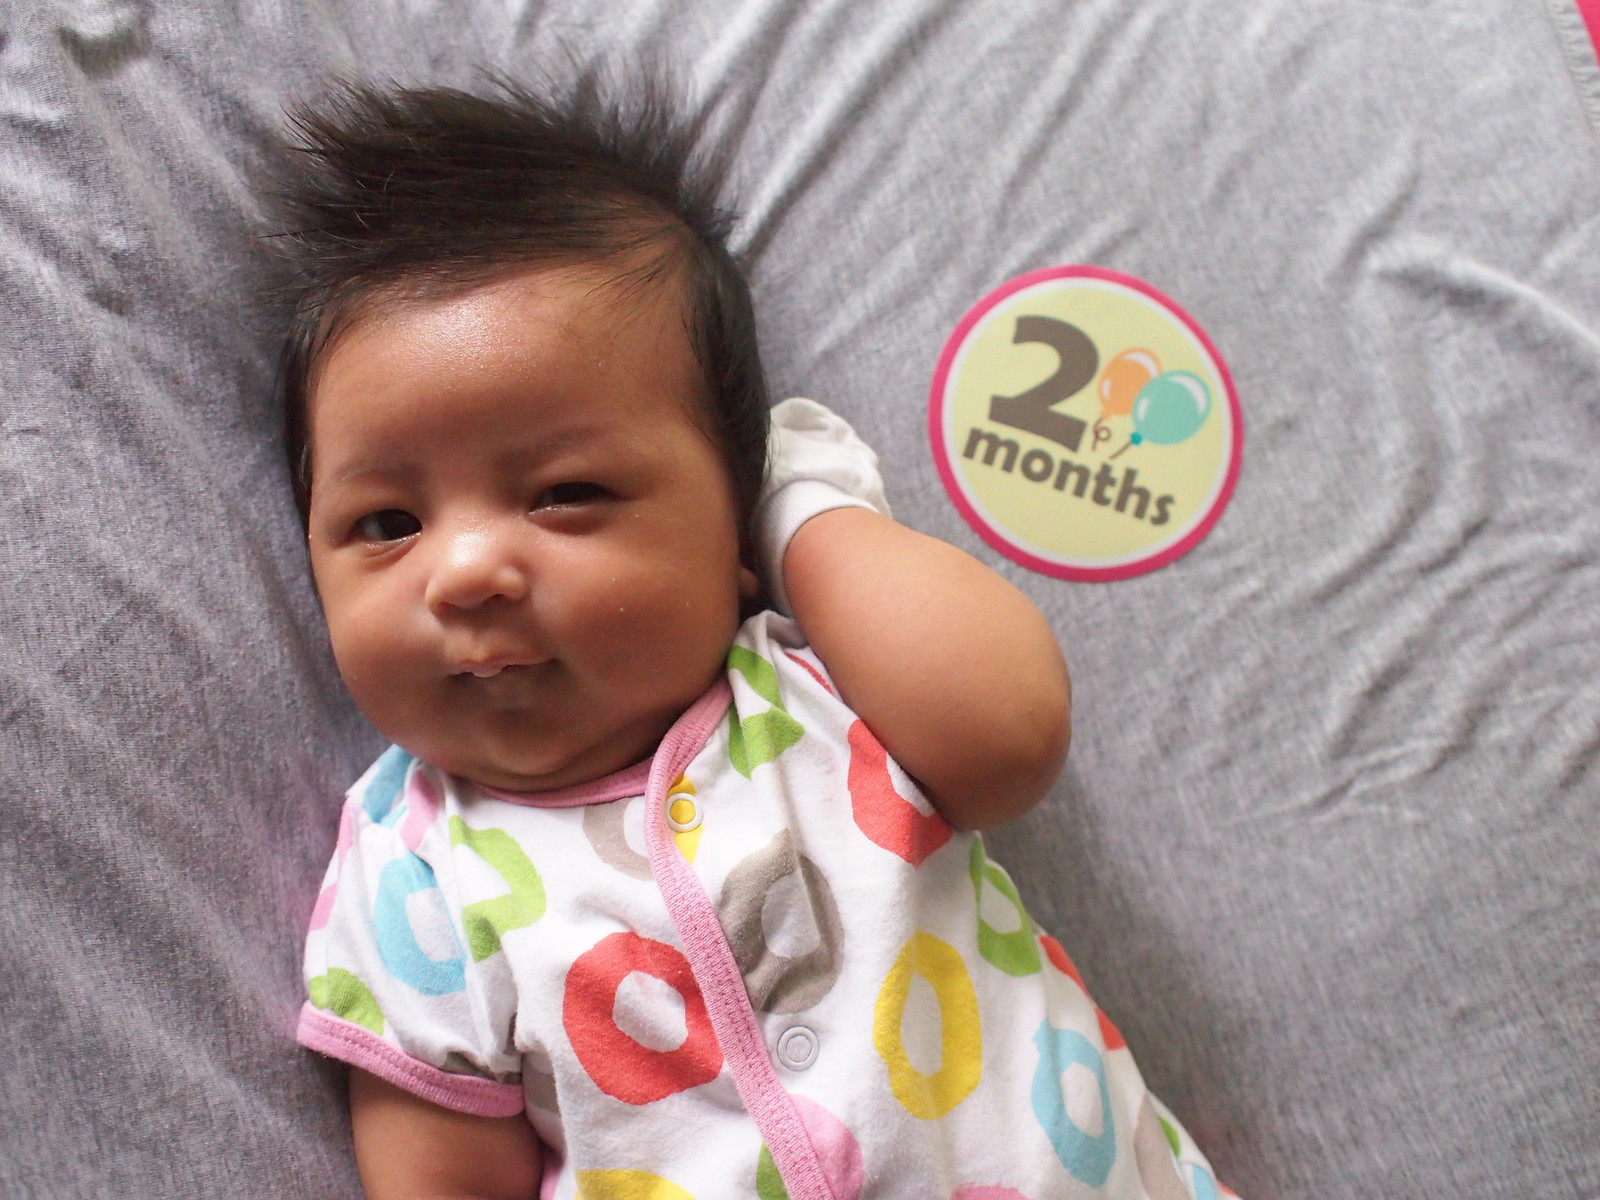 29 Oct - Zara is 2mth young